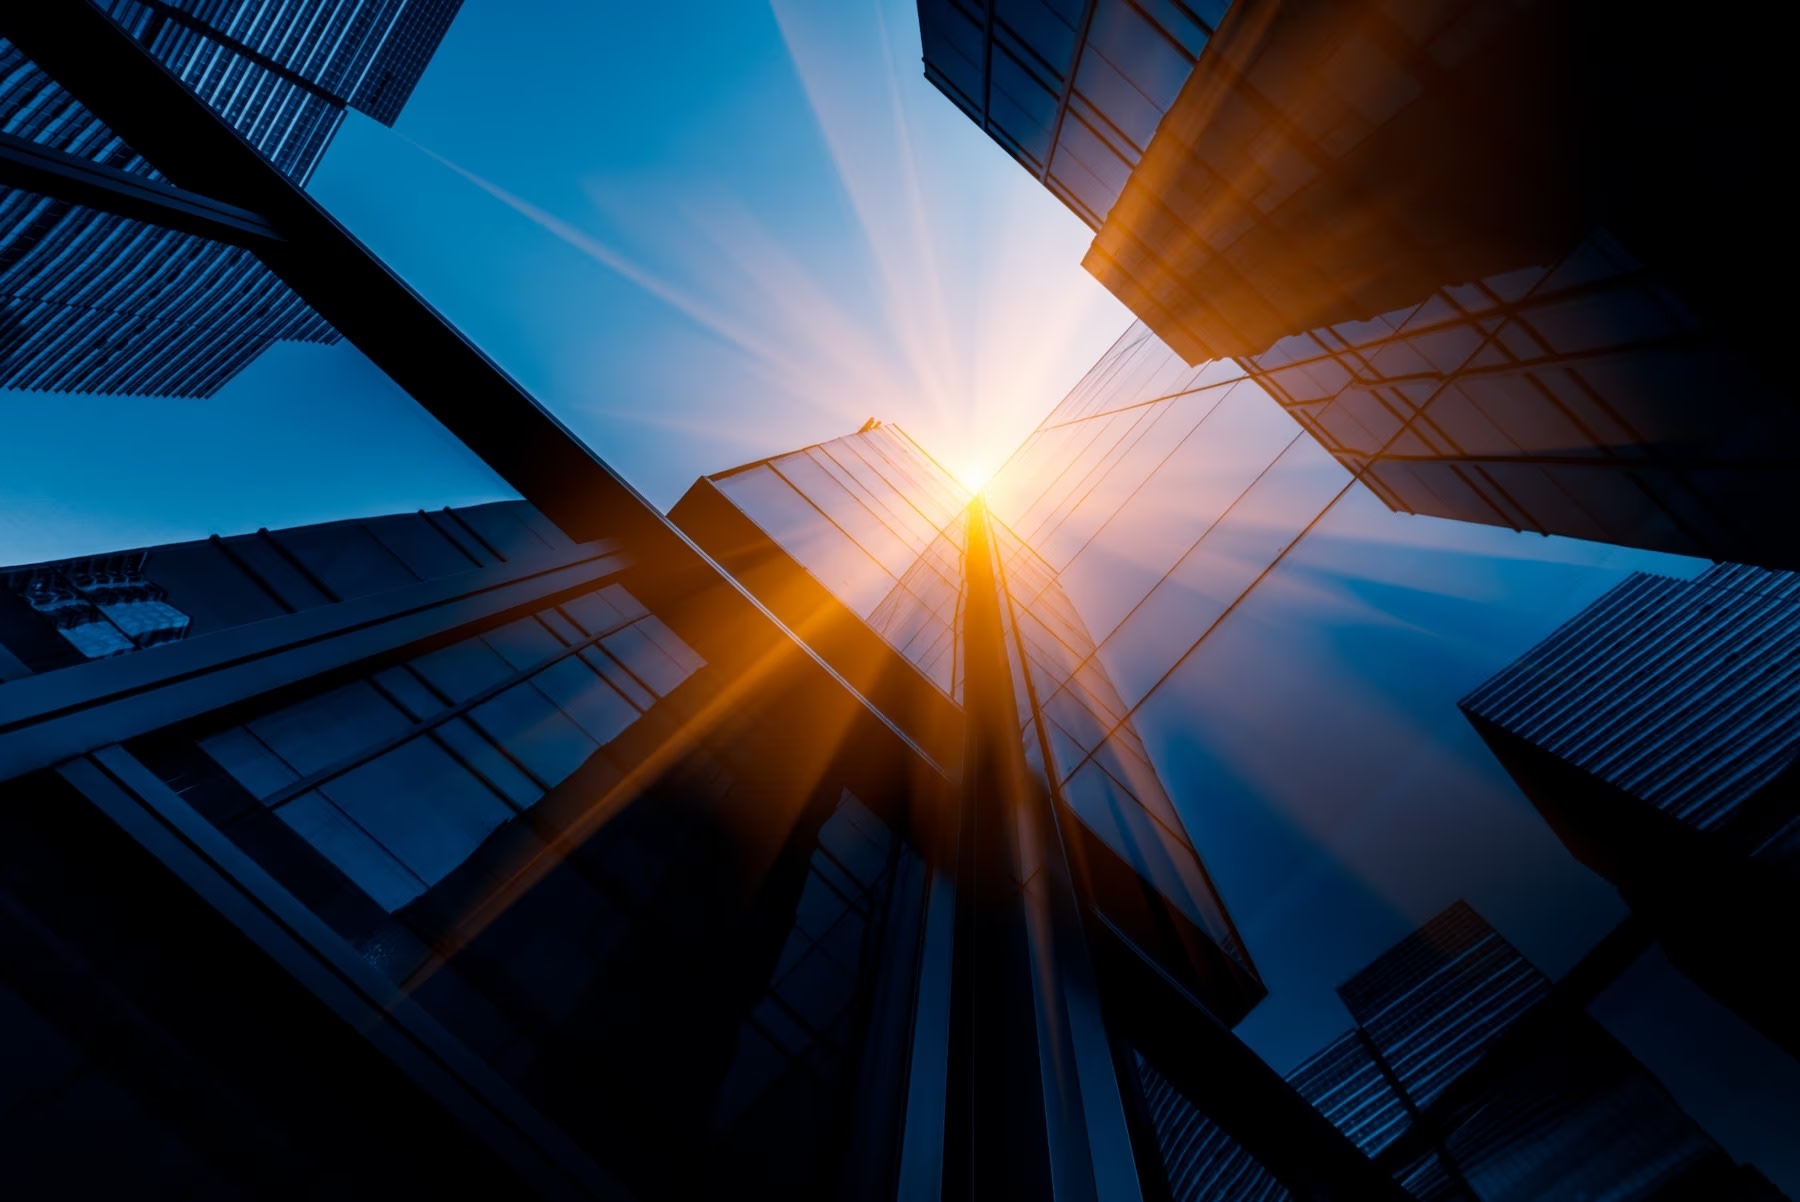 Low angle view up of finance sector skyscrapers with blue sky and sunlight